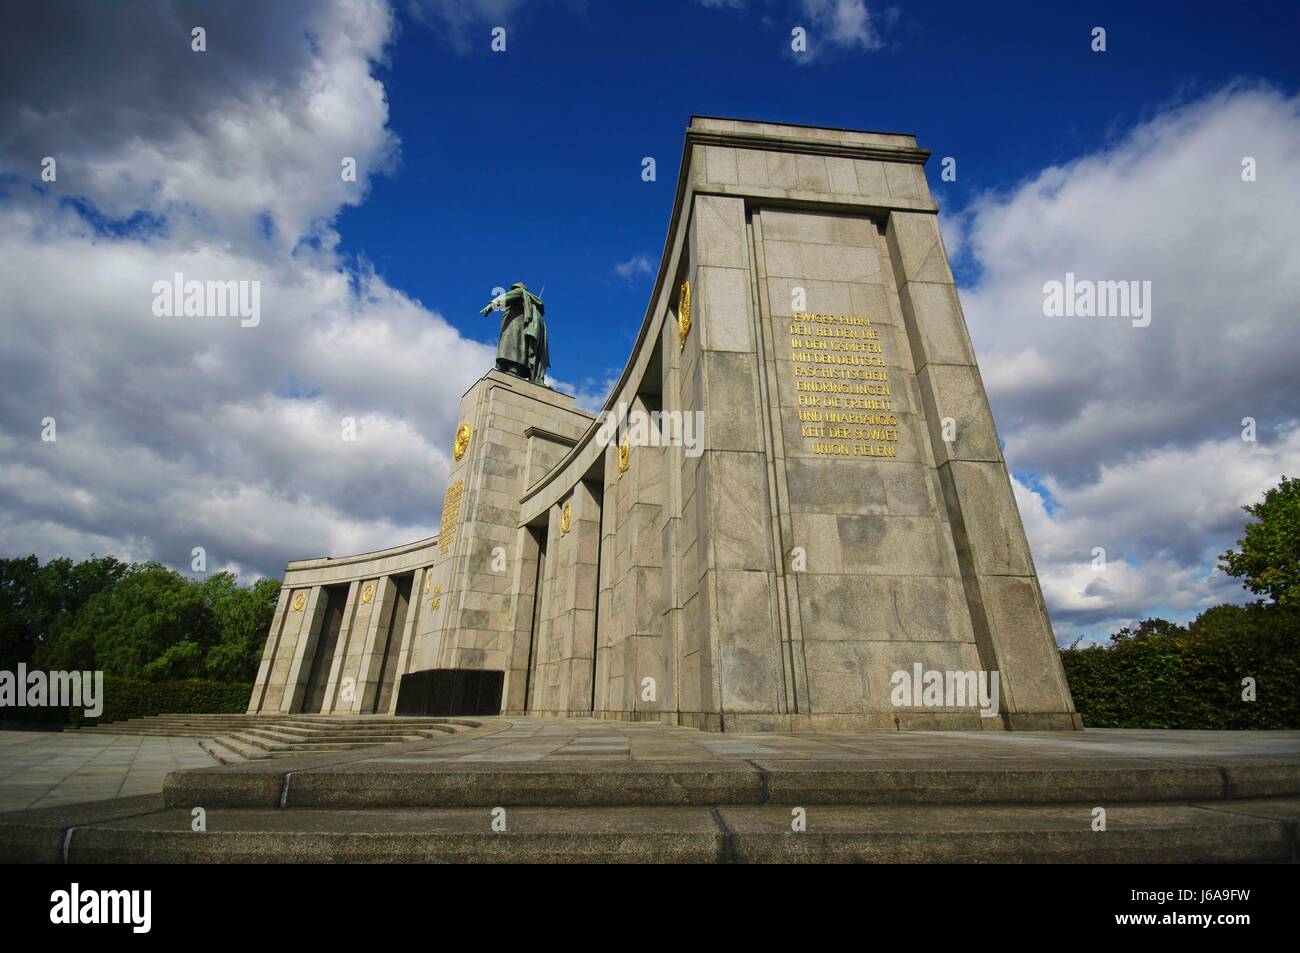 columns war soldier cemetery berlin style of construction architecture Stock Photo